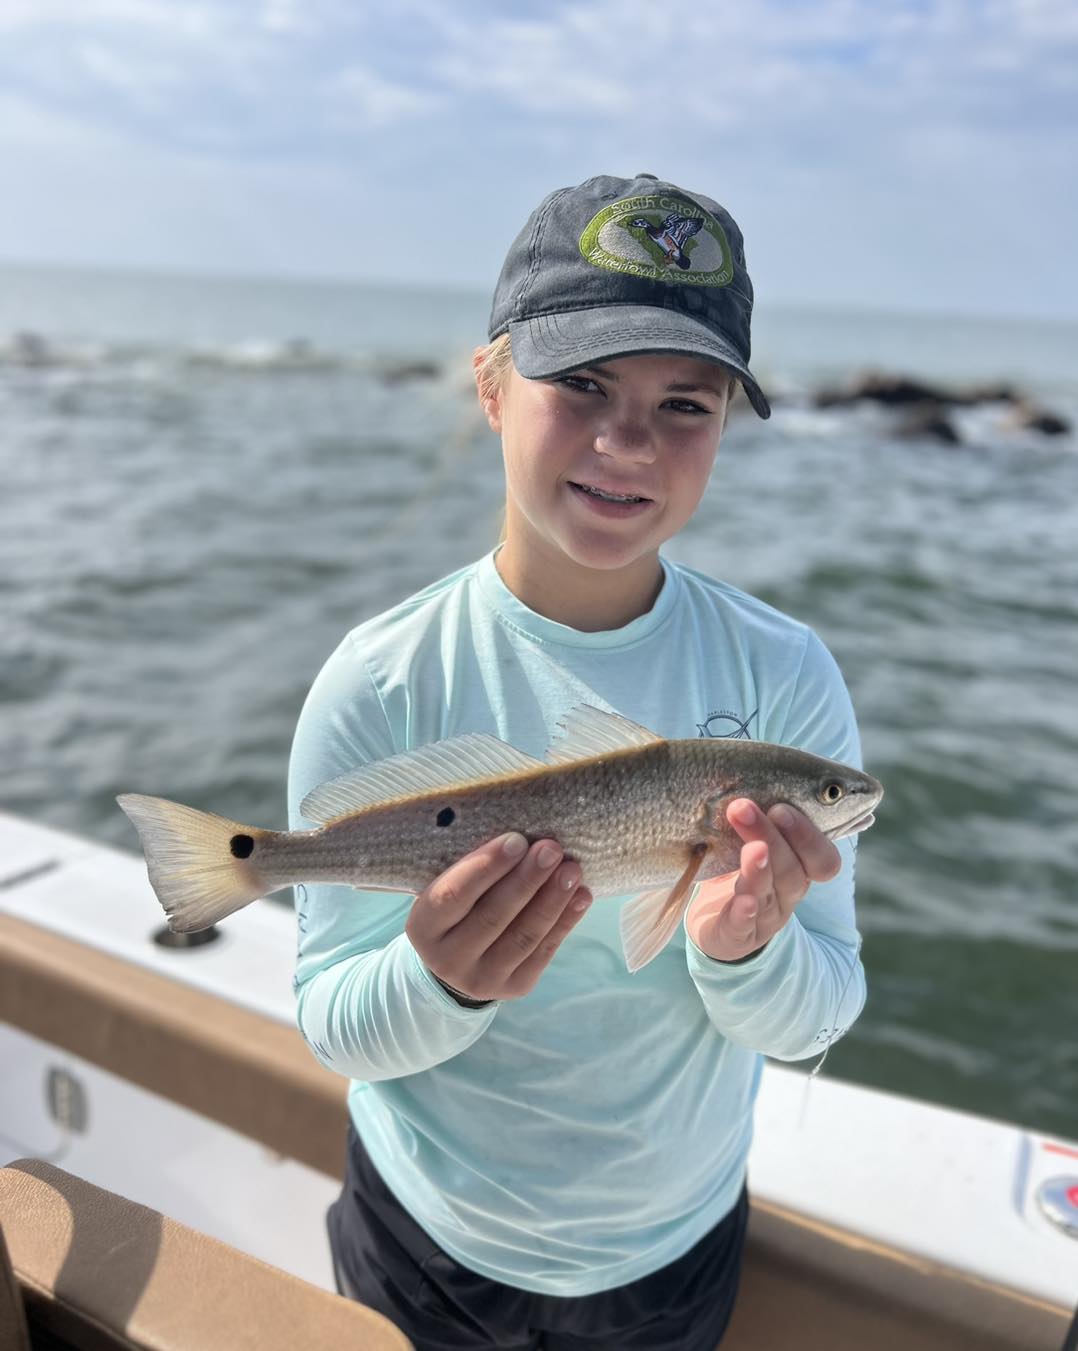 Charleston Fishing in Pictures - Photo Gallery Highlights